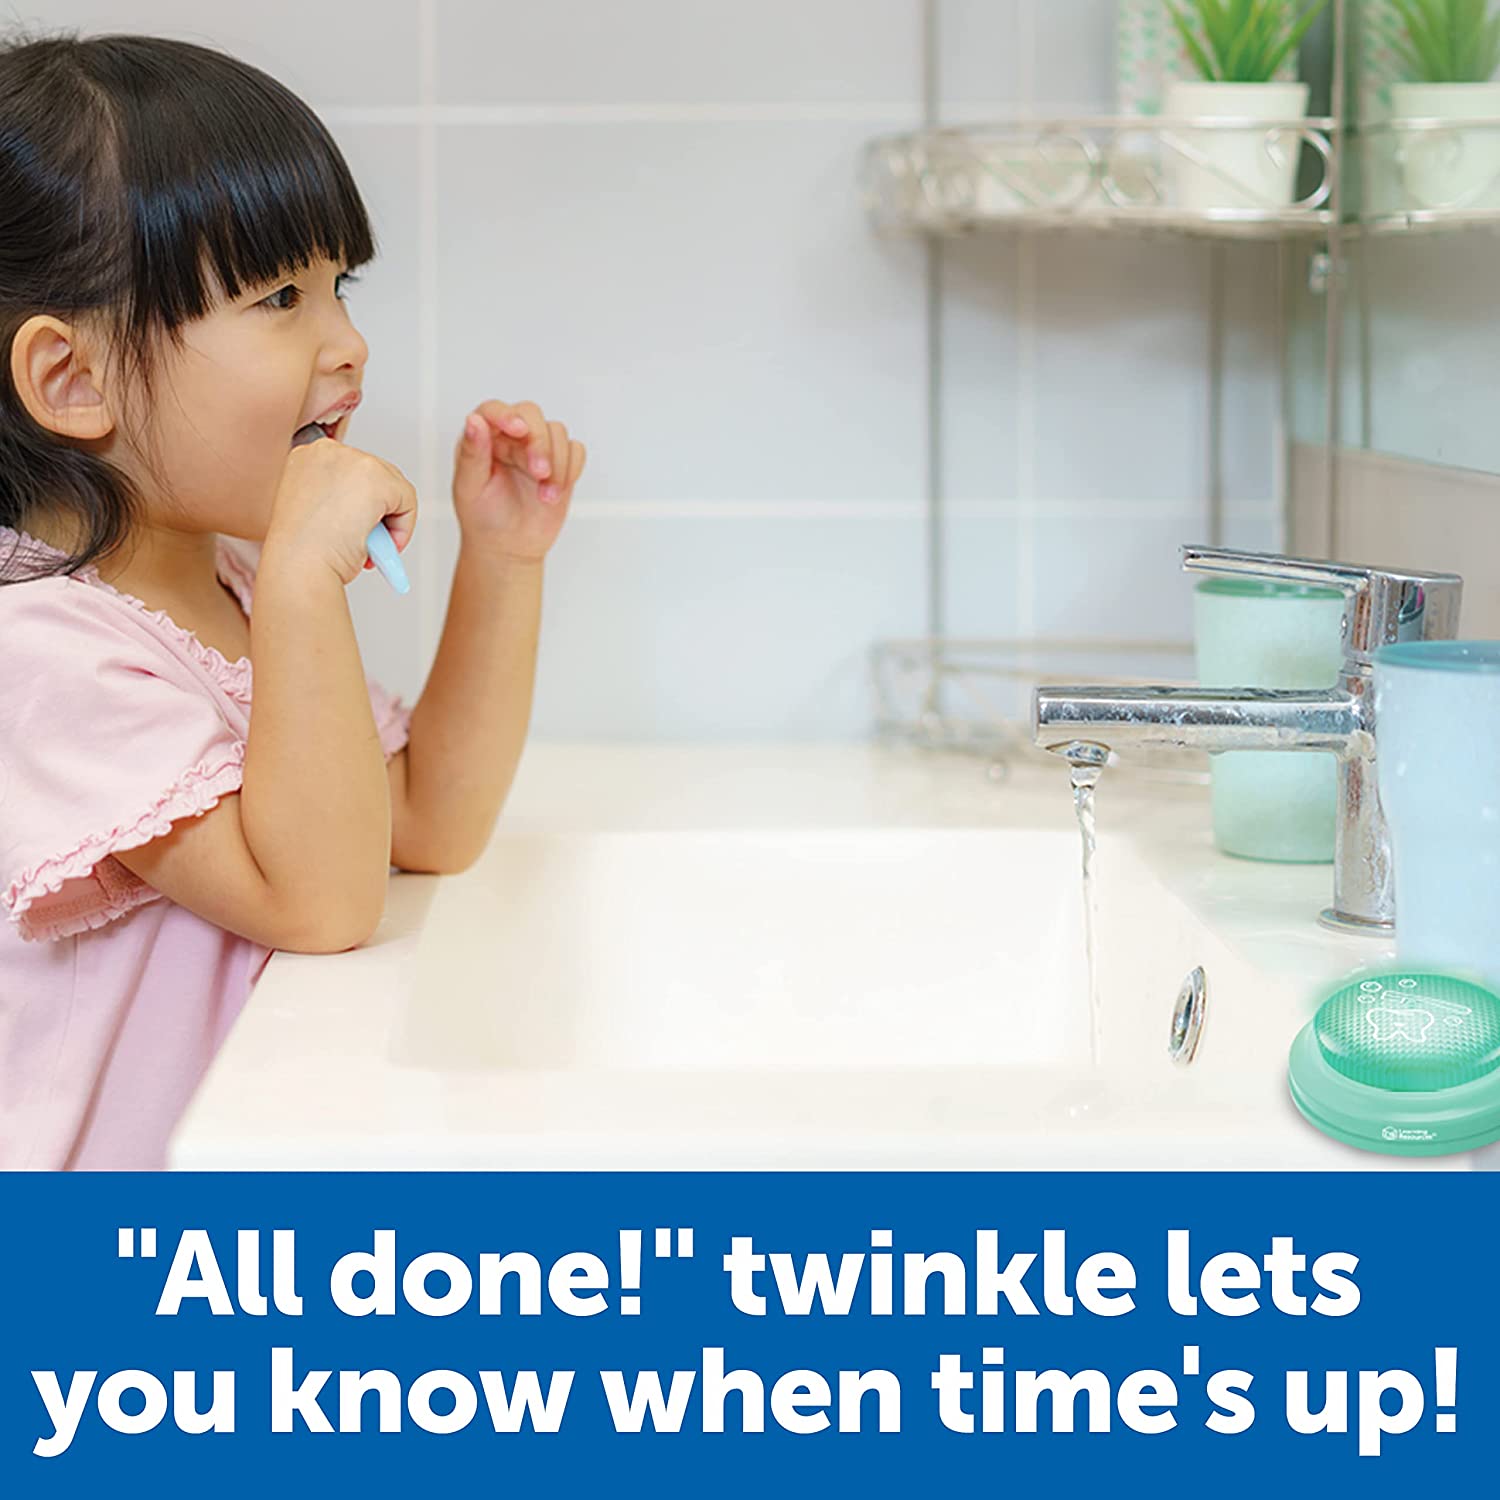 A child with medium skin tone and black hair is in front of a sink in the bathroom brushing their teeth. There is a Toothbrush Timer on the sink ledge.